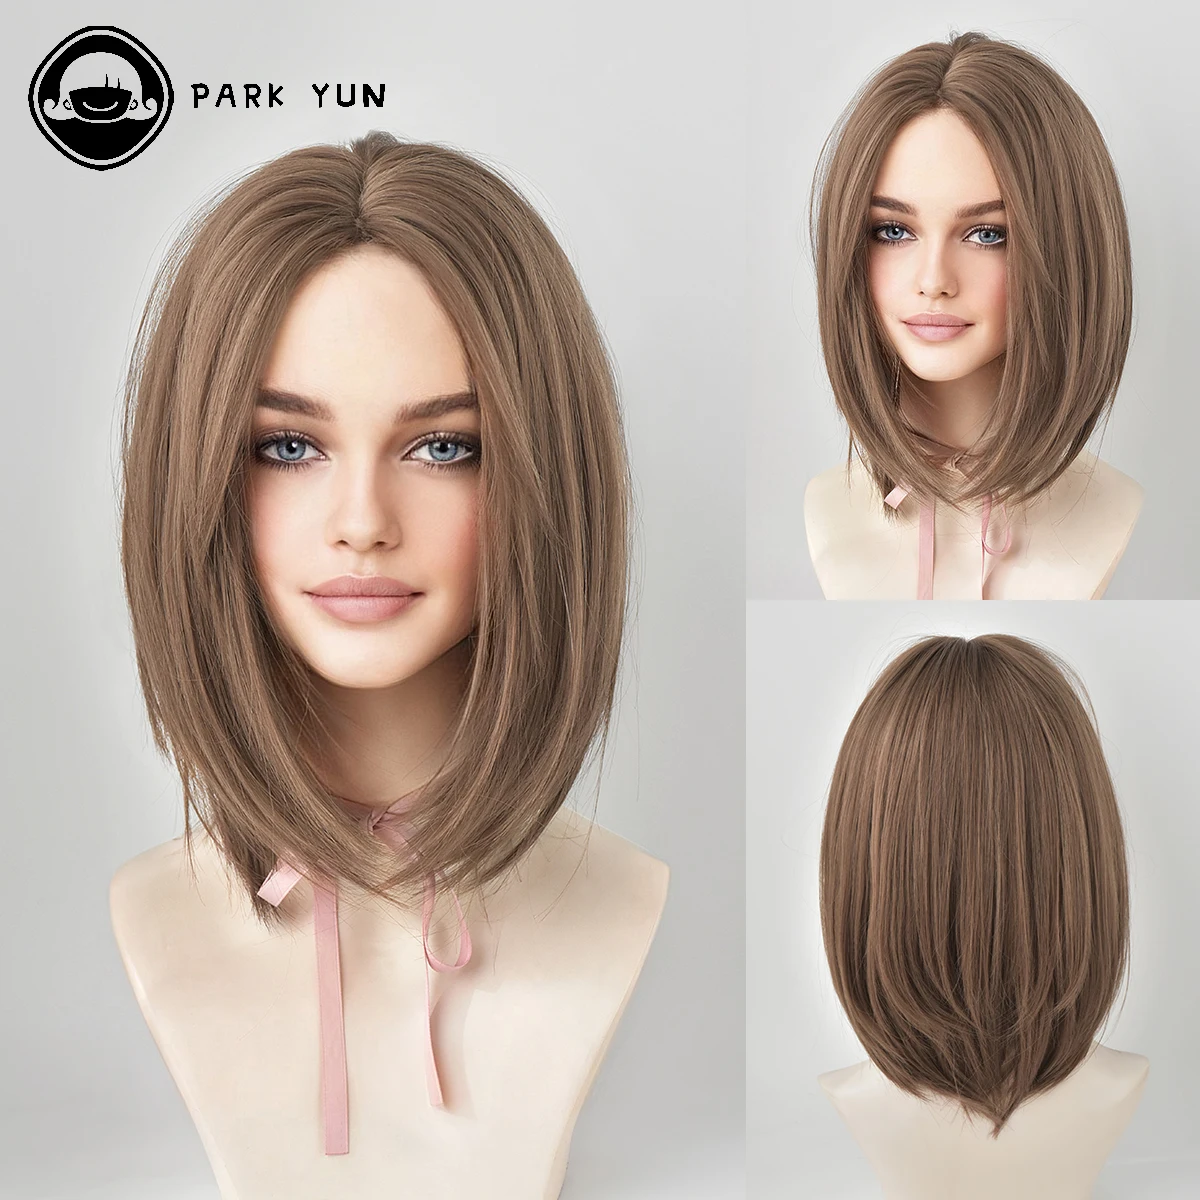 Daily Date Short Straight Synthetic Wigs for Women Flaxen Color Bob Wigs with Bangs Cosplay Party Heat Resistant Fake Hair